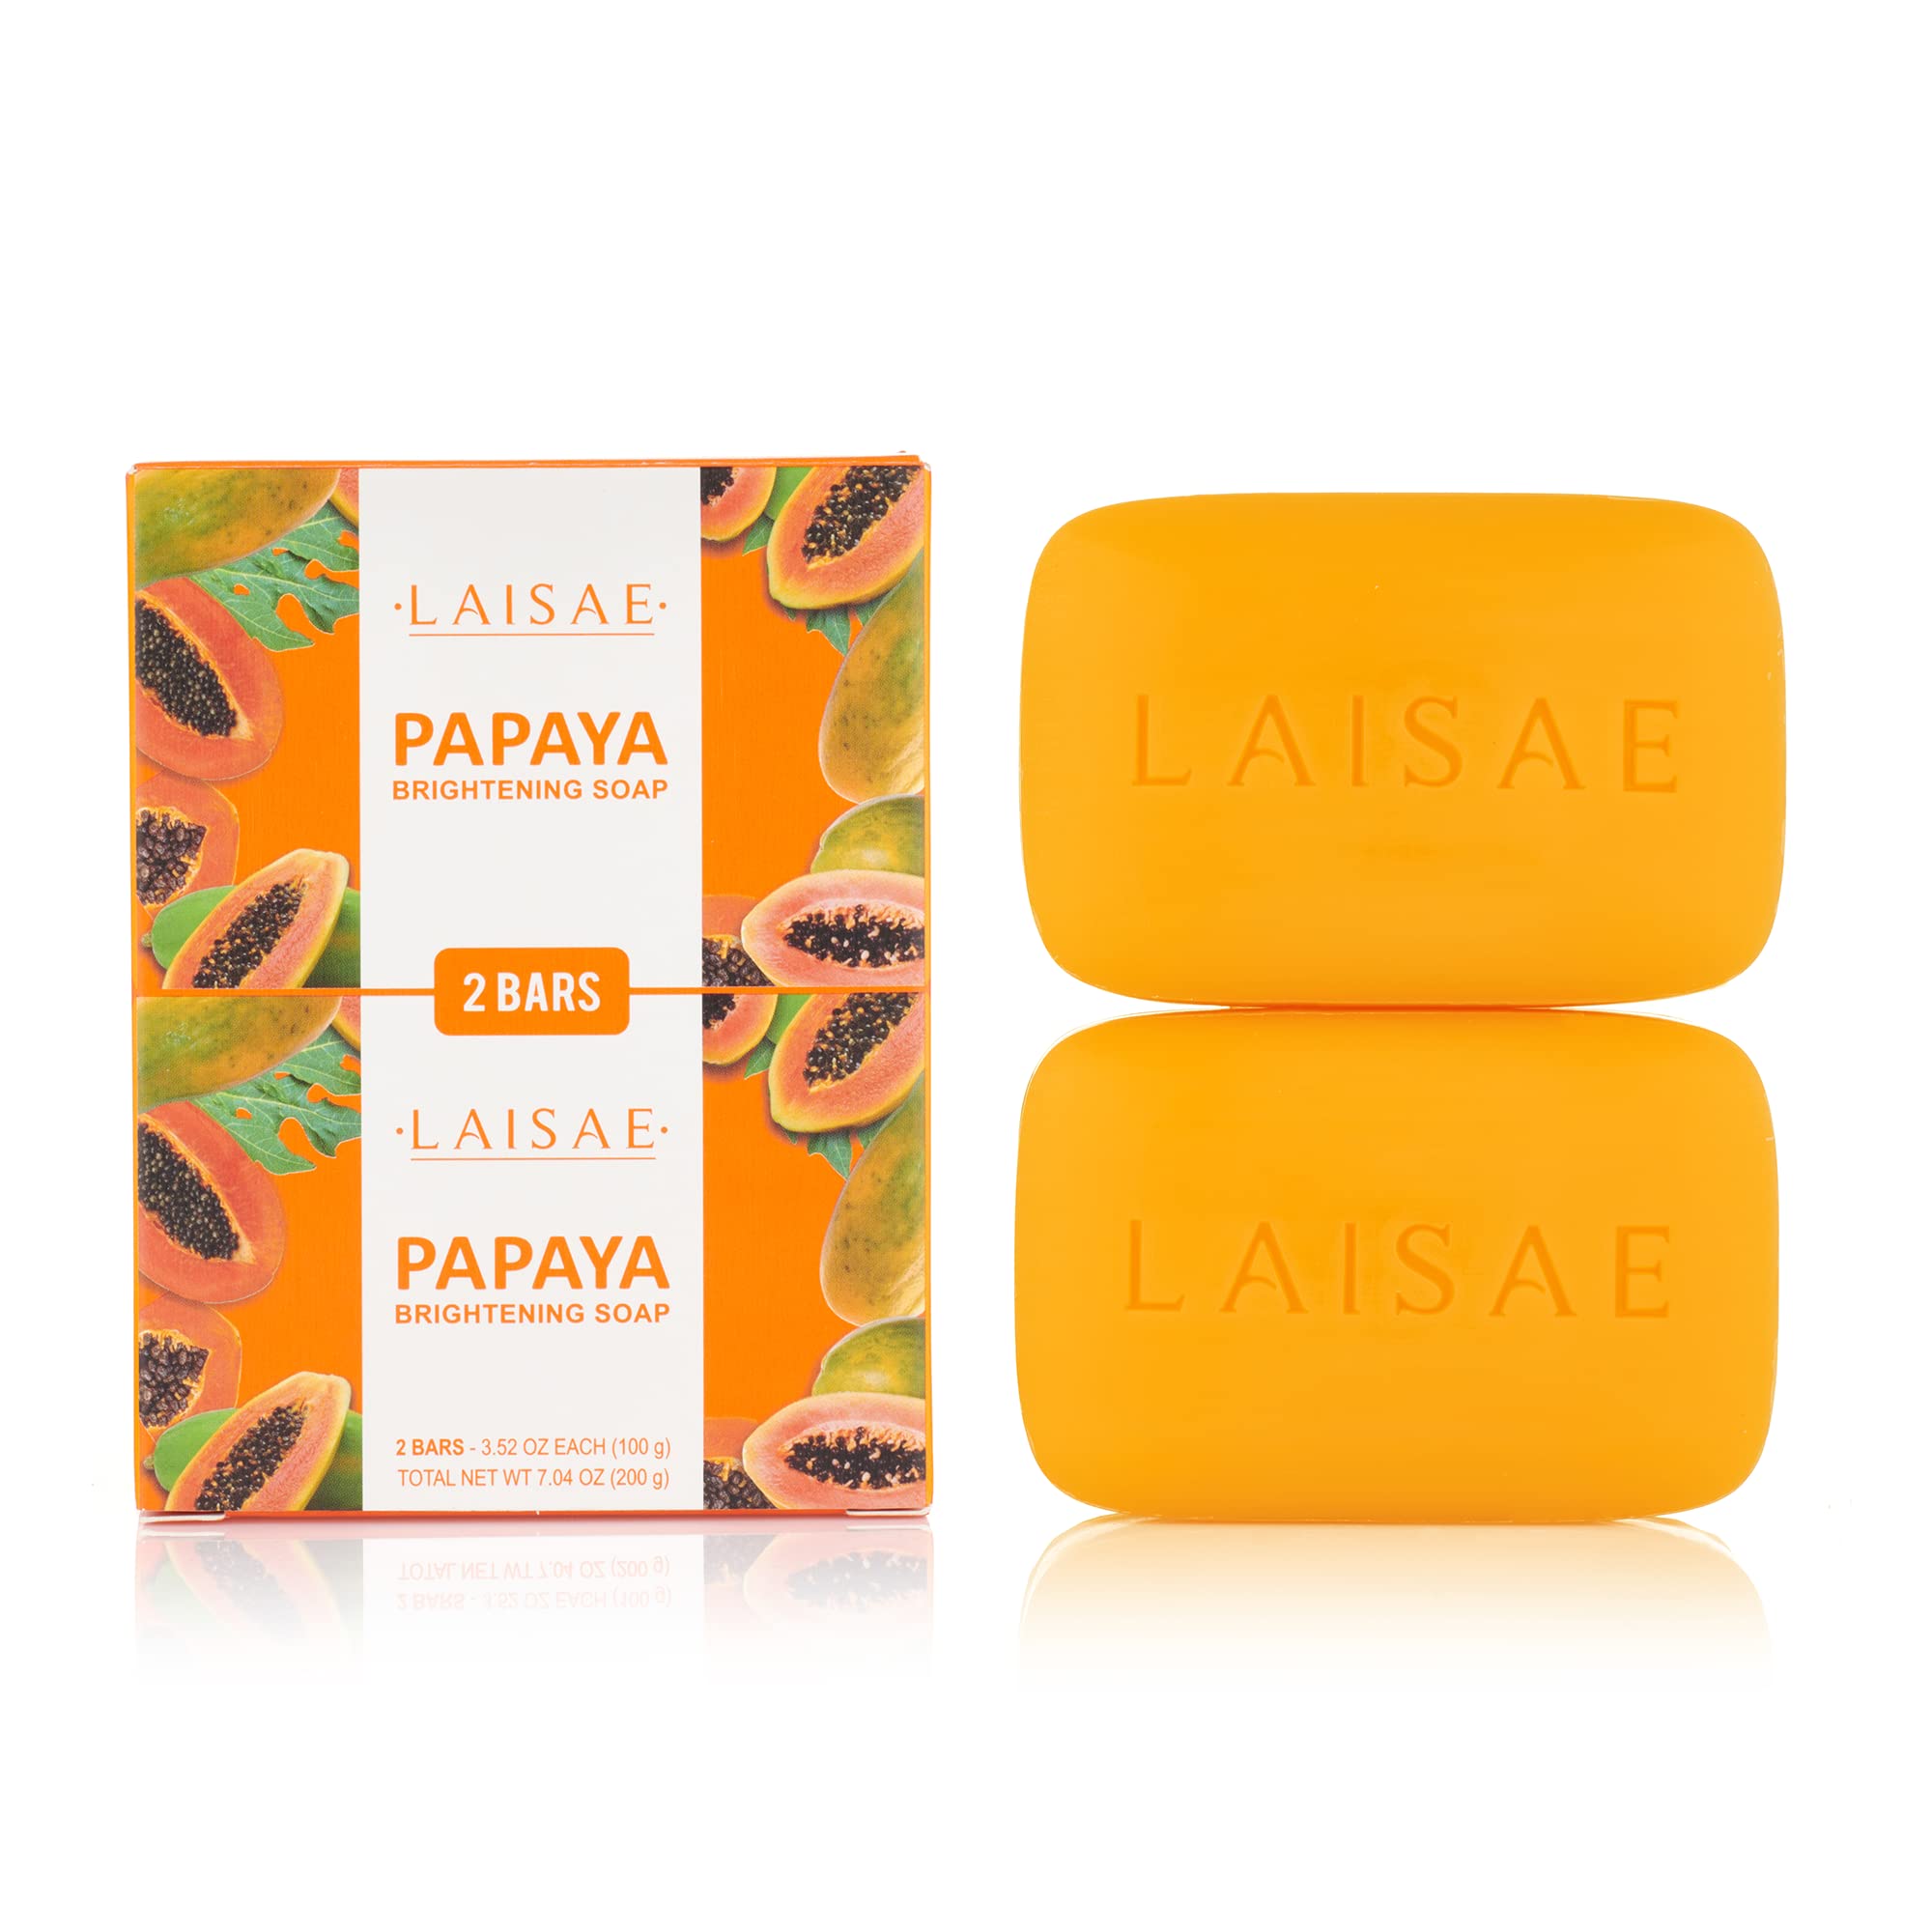 LAISAE Papaya Brightening Soap, Exfoliating Face & Body with Aloe Vera, Niacinamide, Jojoba Oil for Acne Scars, Age Spots, Fine Lines a